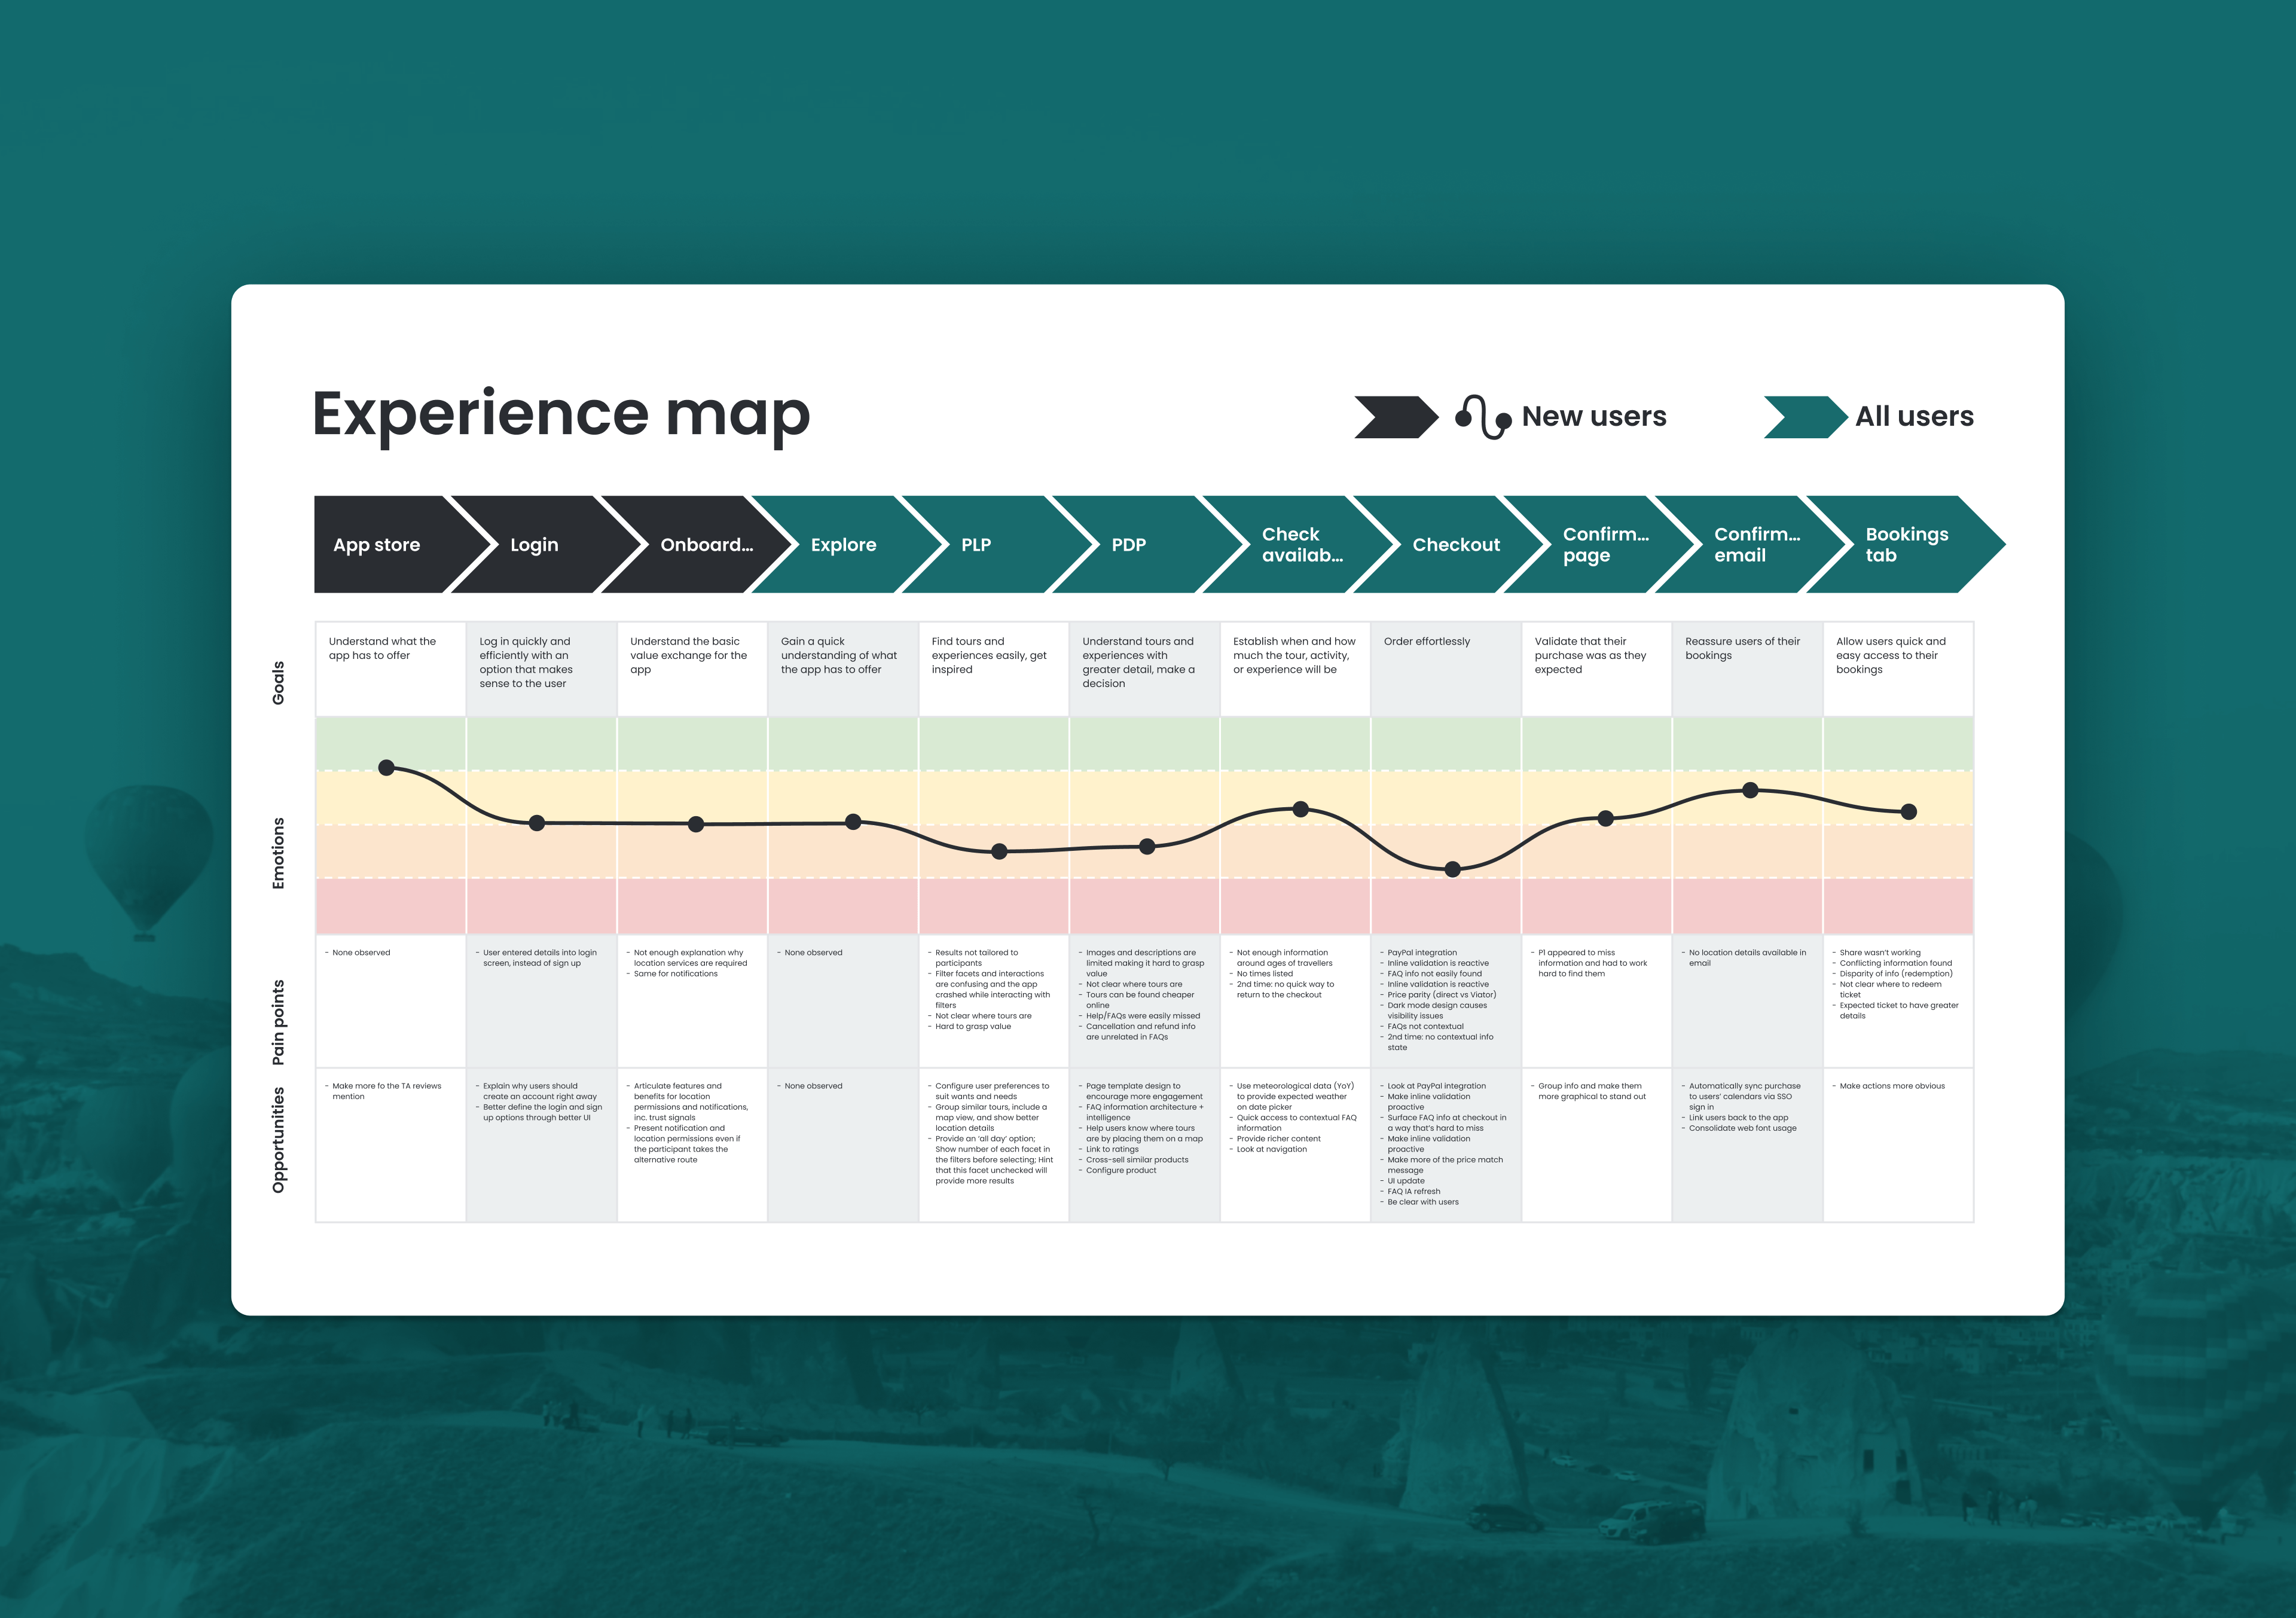 Customer journey map created by interviewing Viator app users